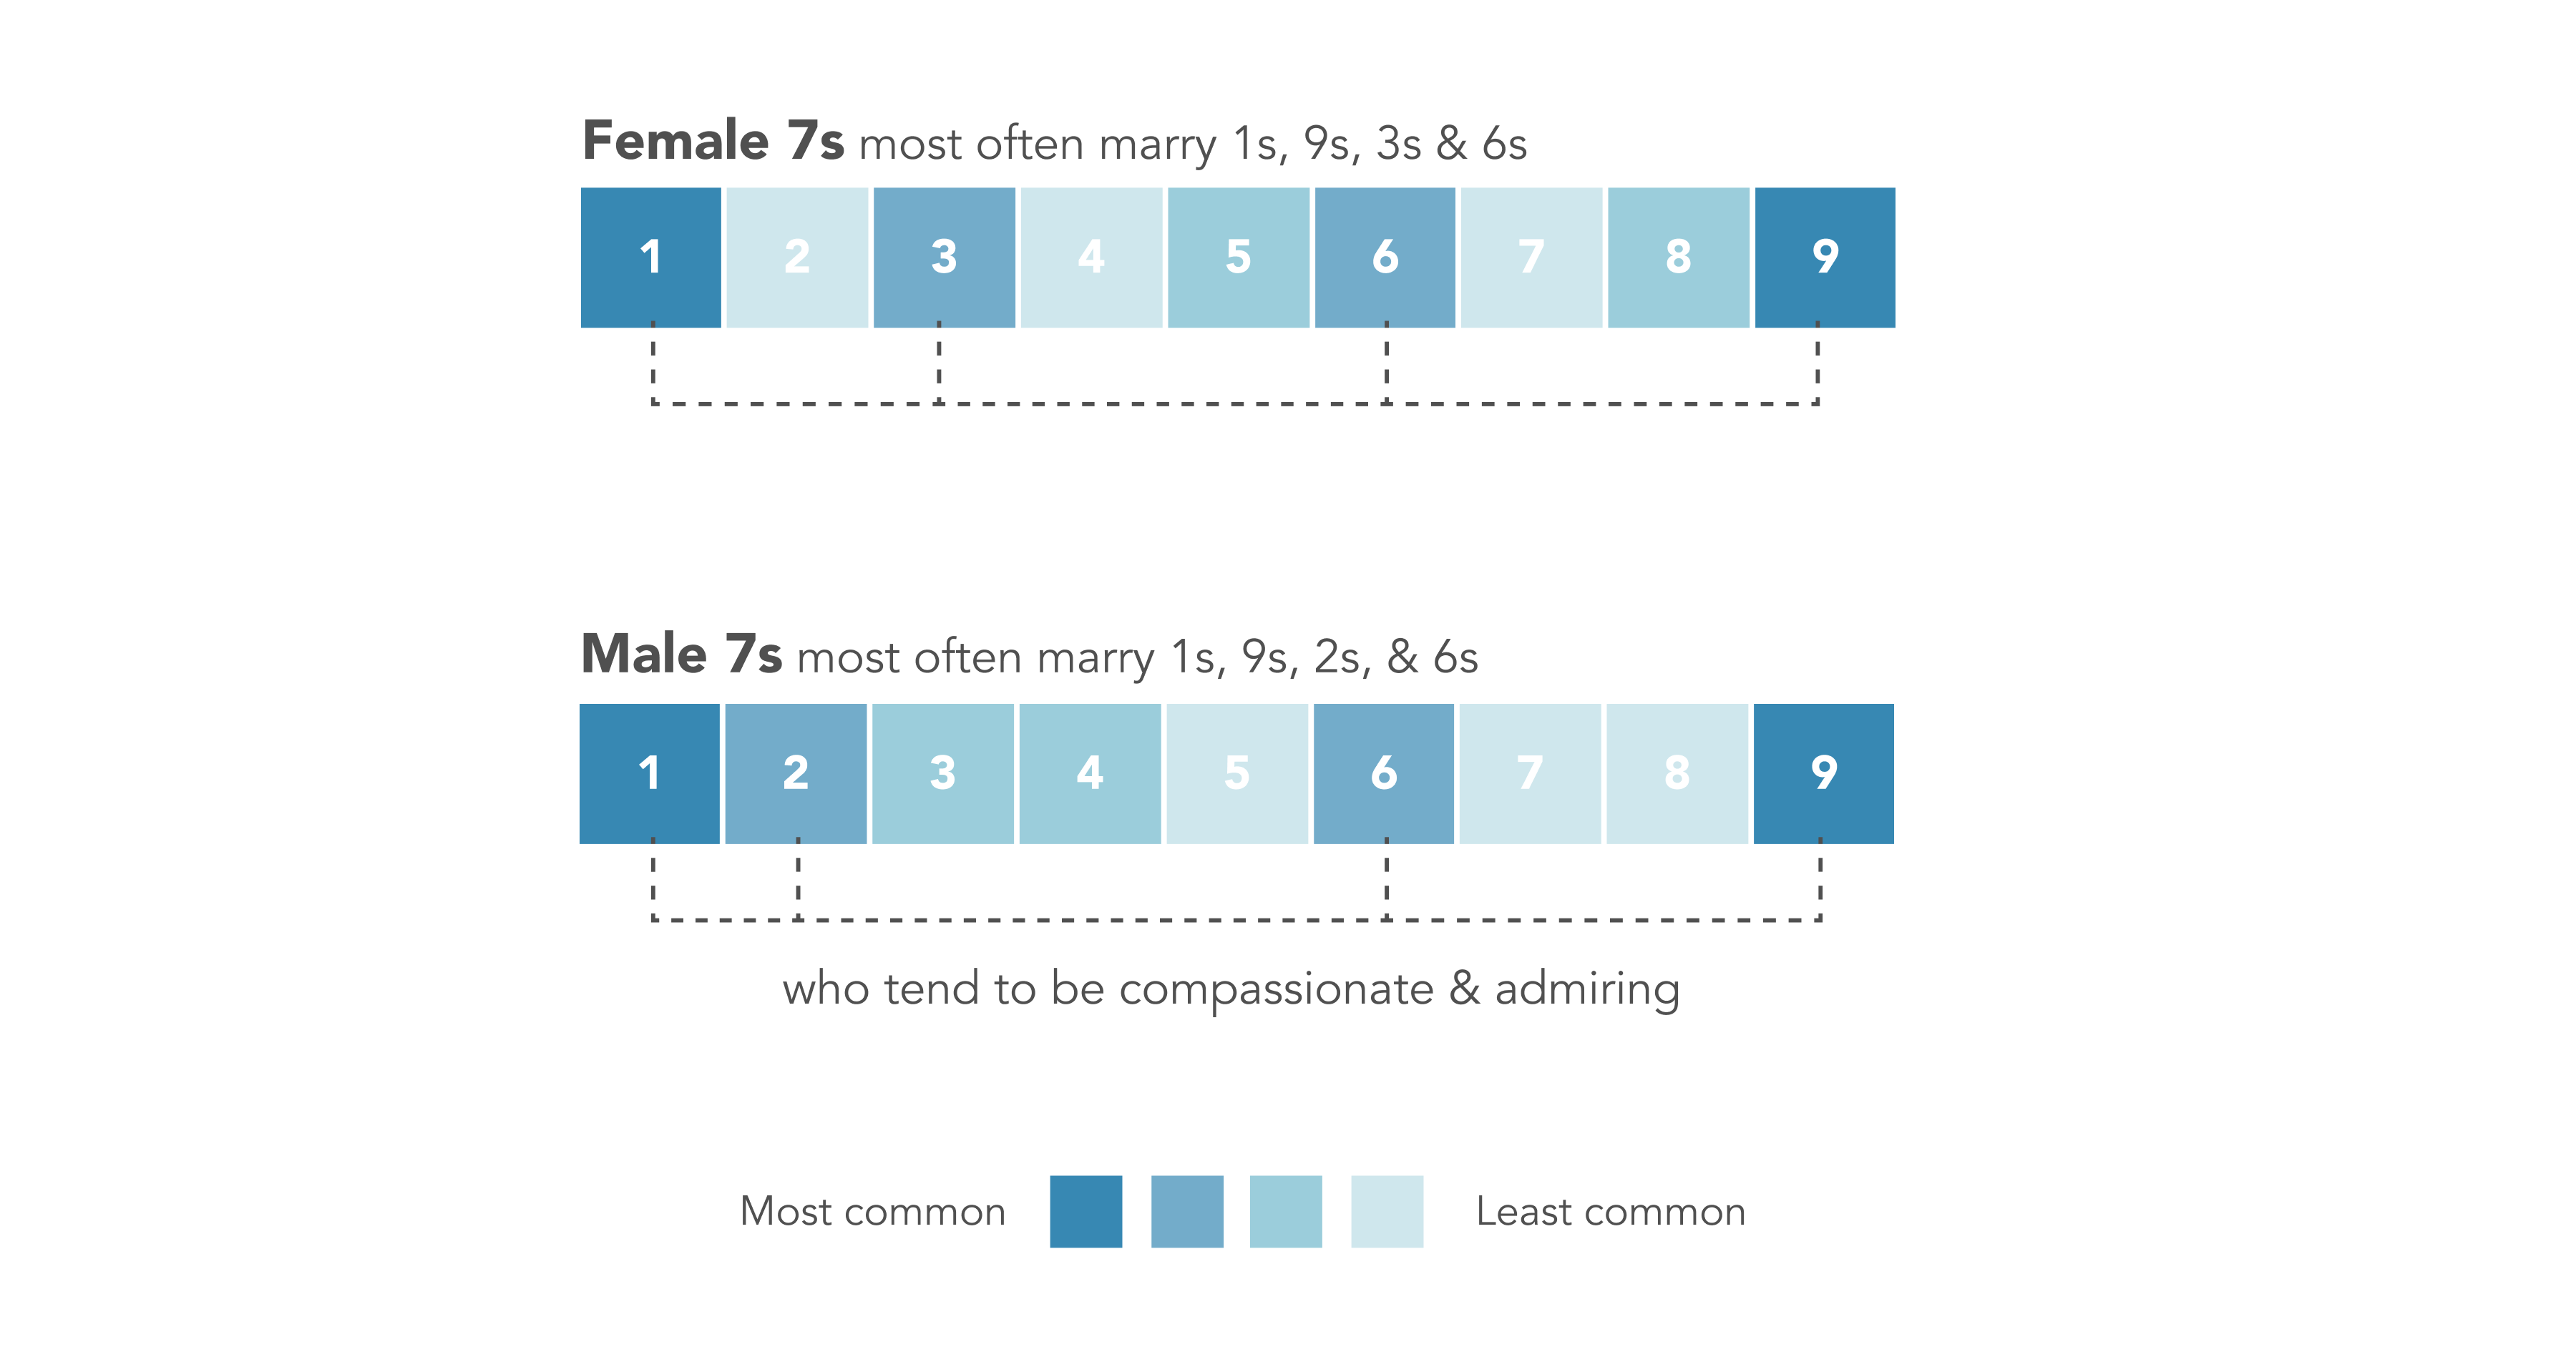 The marriage data we compiled and analyzed was broken down by gender, with Female 7s most often marrying 1s, 9s, 3s, and 6s, and Male 7s most often marrying 1s, 9s, 2s, and 6s (in that order). 